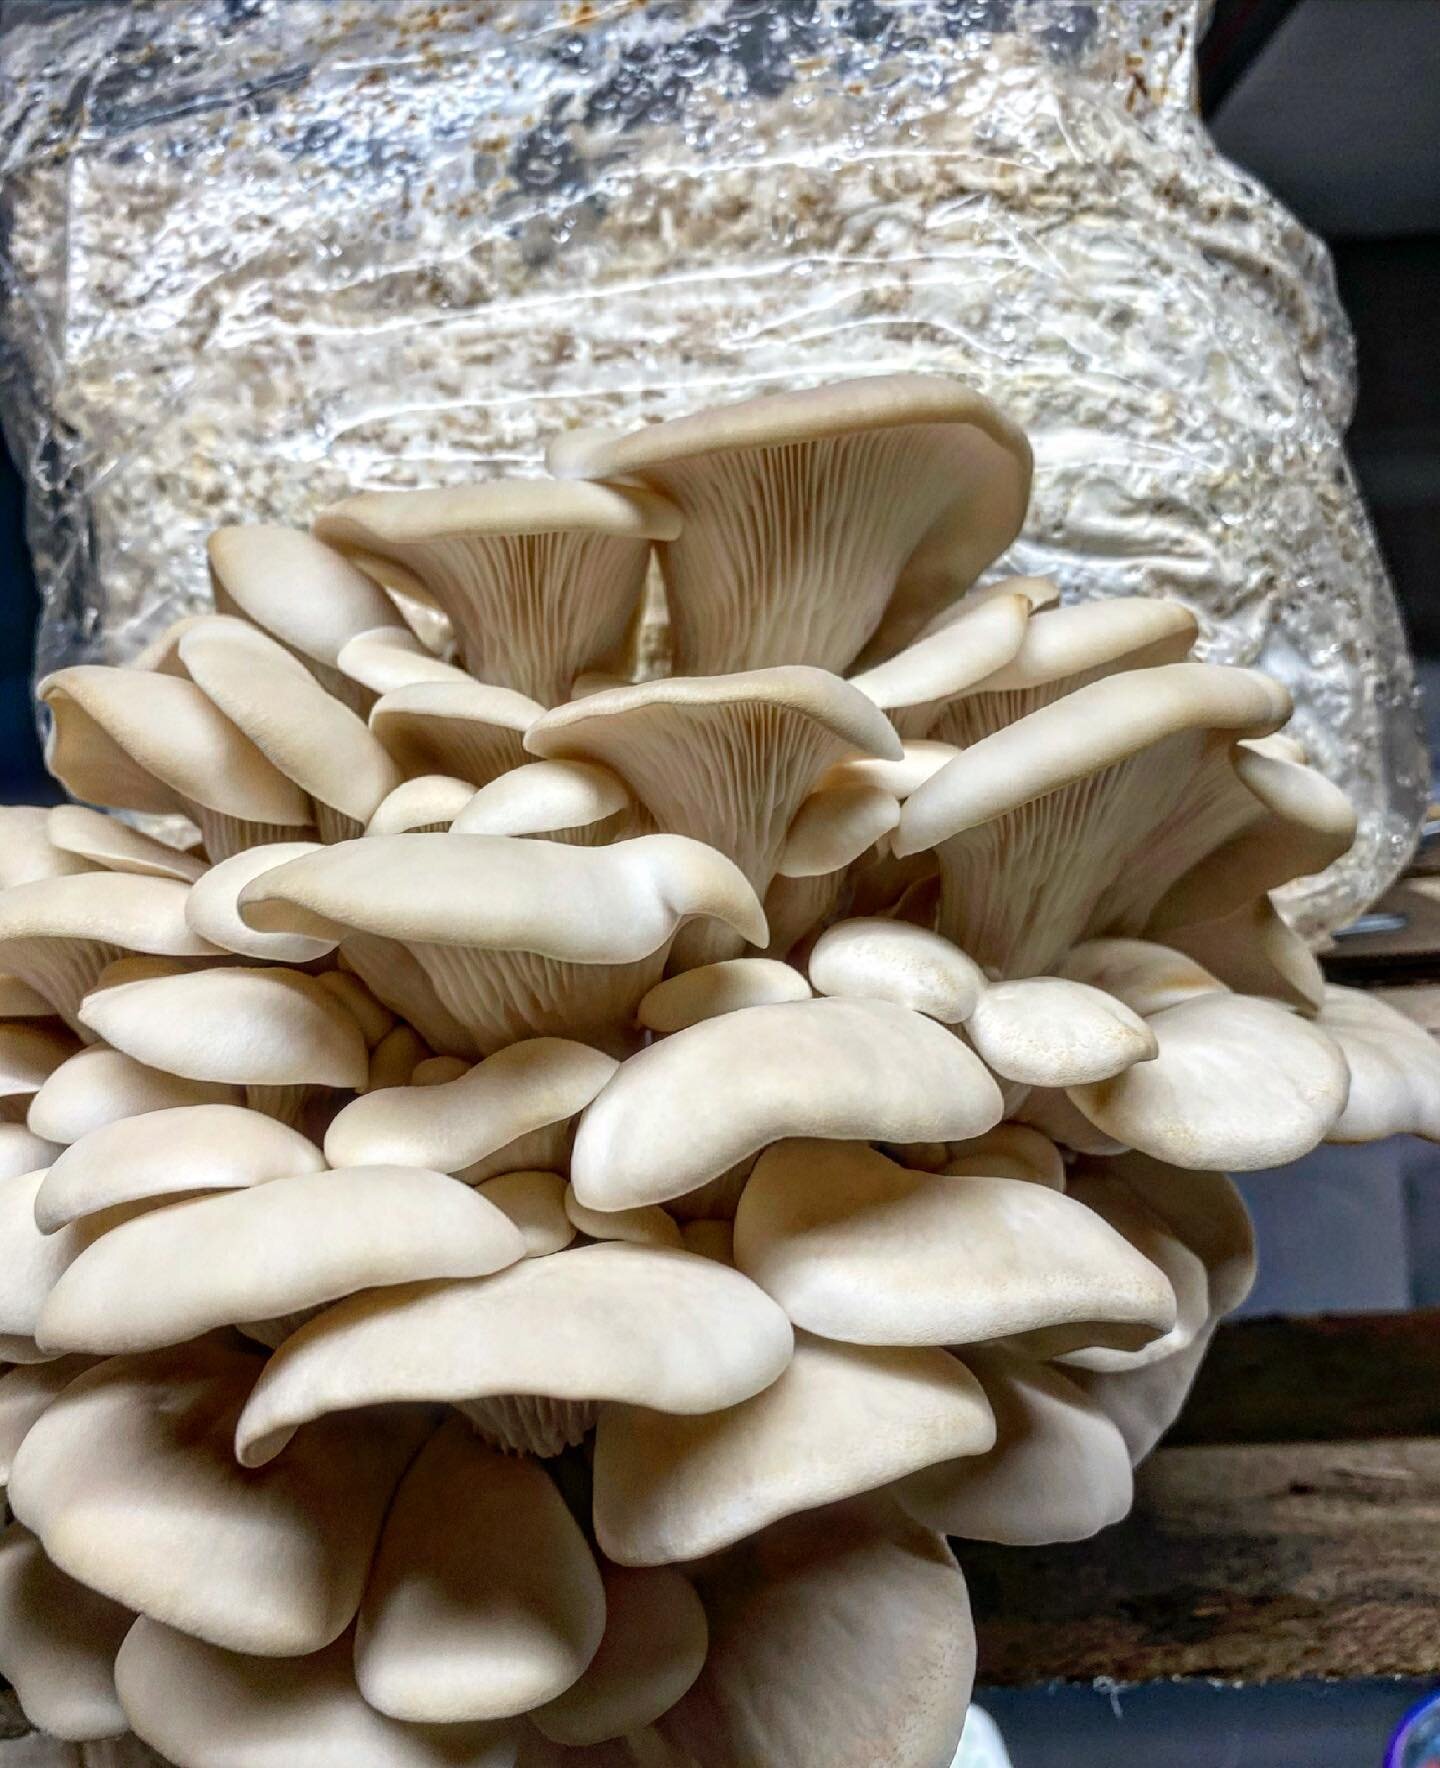 A local pearl oyster strain (POLOC) growing WITHOUT ANY CARE! This cluster grew in our dry incubation room with zero added humidity. Other oyster varieties browned and failed days ago while these things rip it up!!!